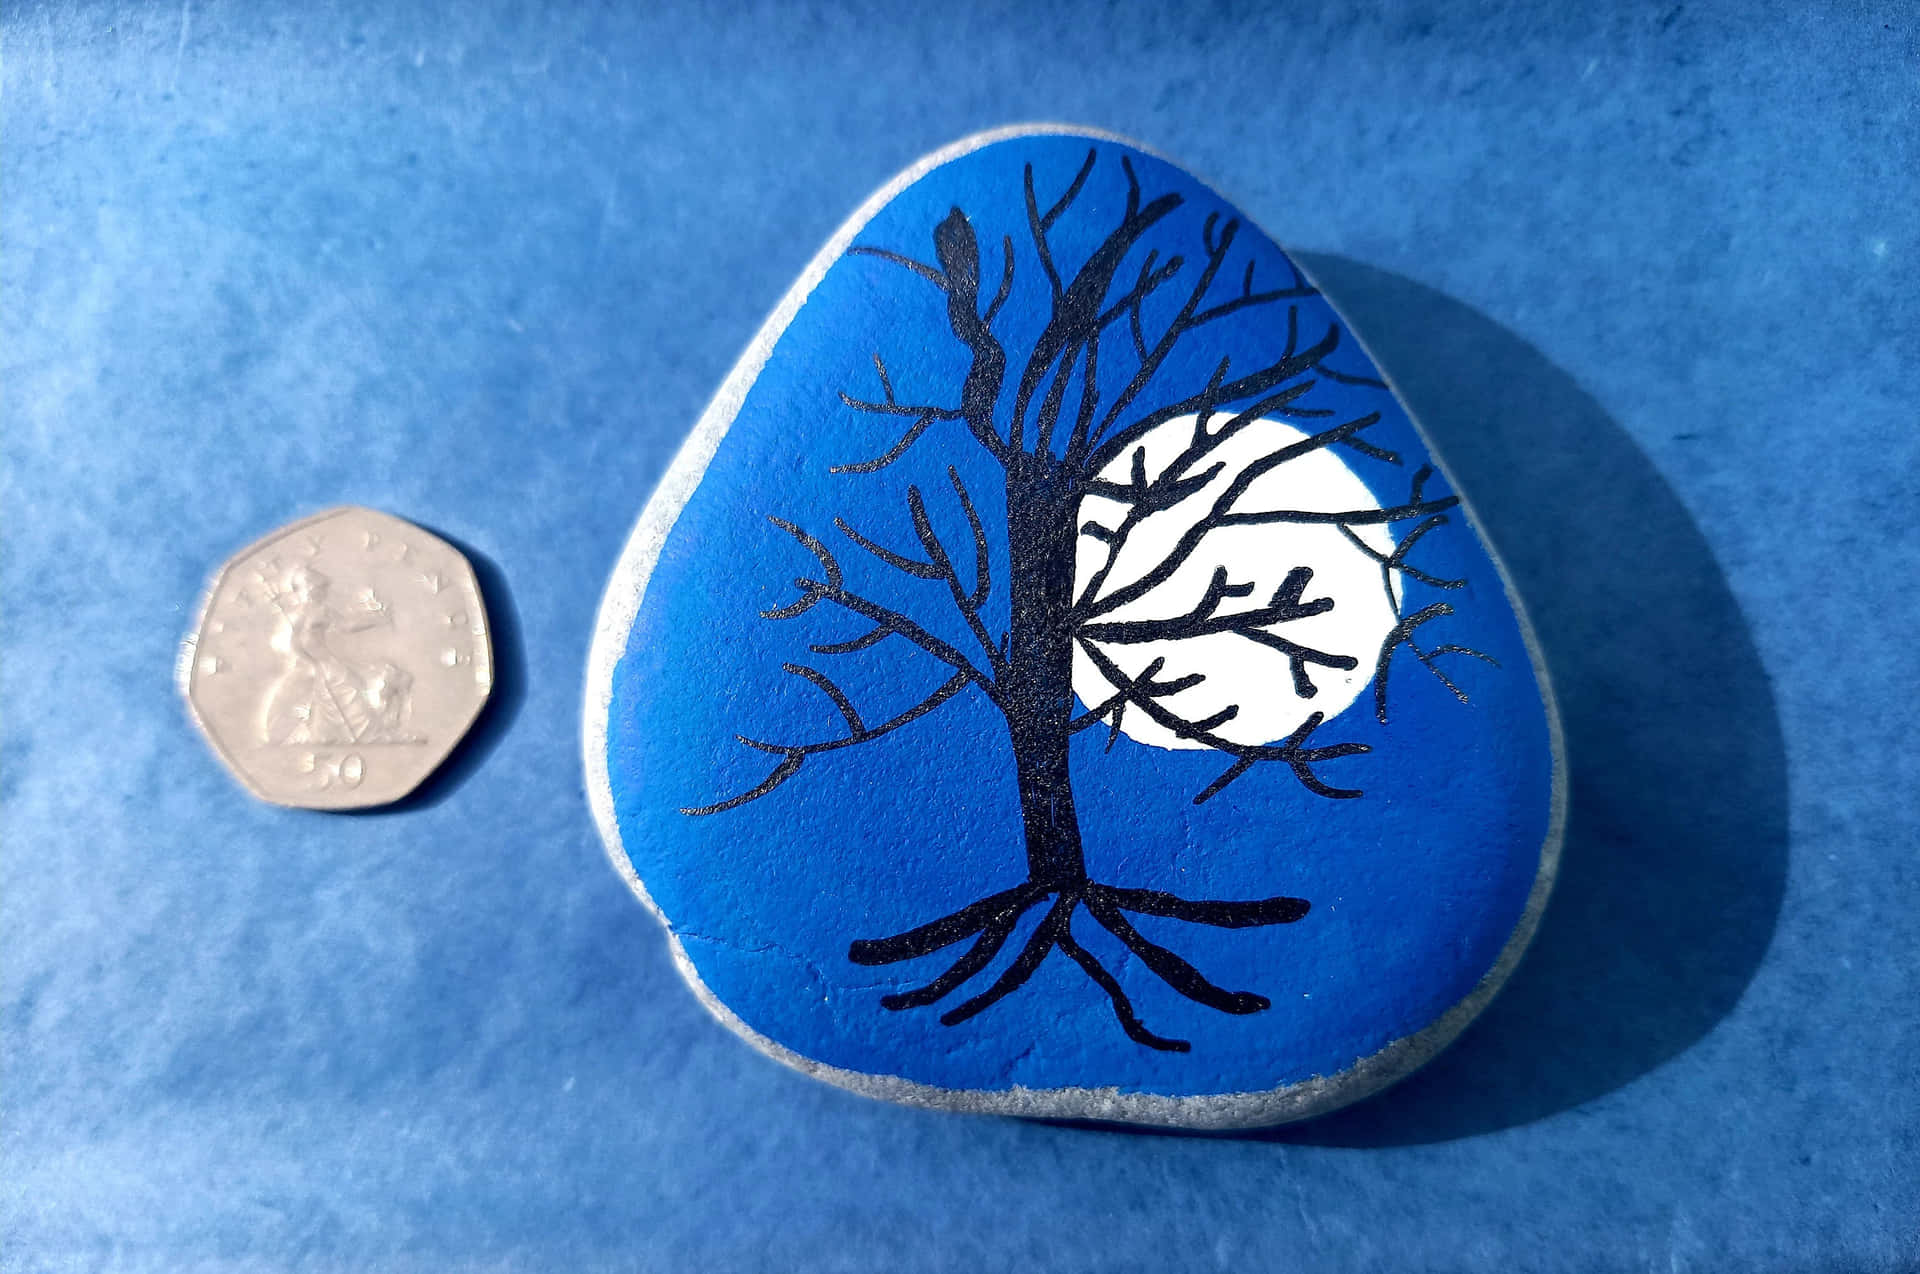 A Blue Stone With A Tree Painted On It